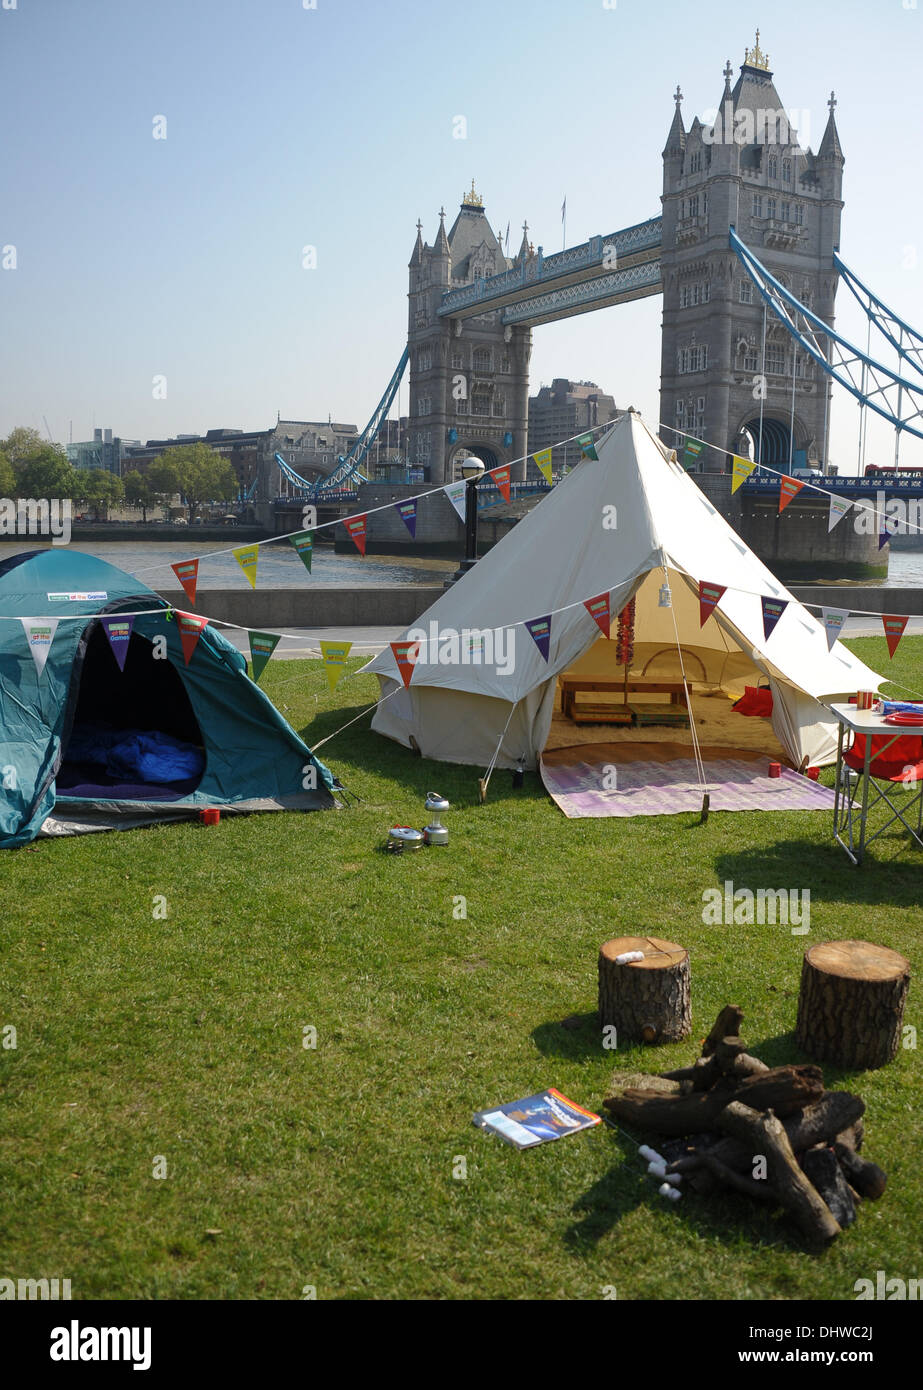 A pop-up camp site appears in Potter's Field, London, aiming to show how  Olympics ticket holders can avoid hotel expenses by pitching their tents at  the company's new camp sites London, England -